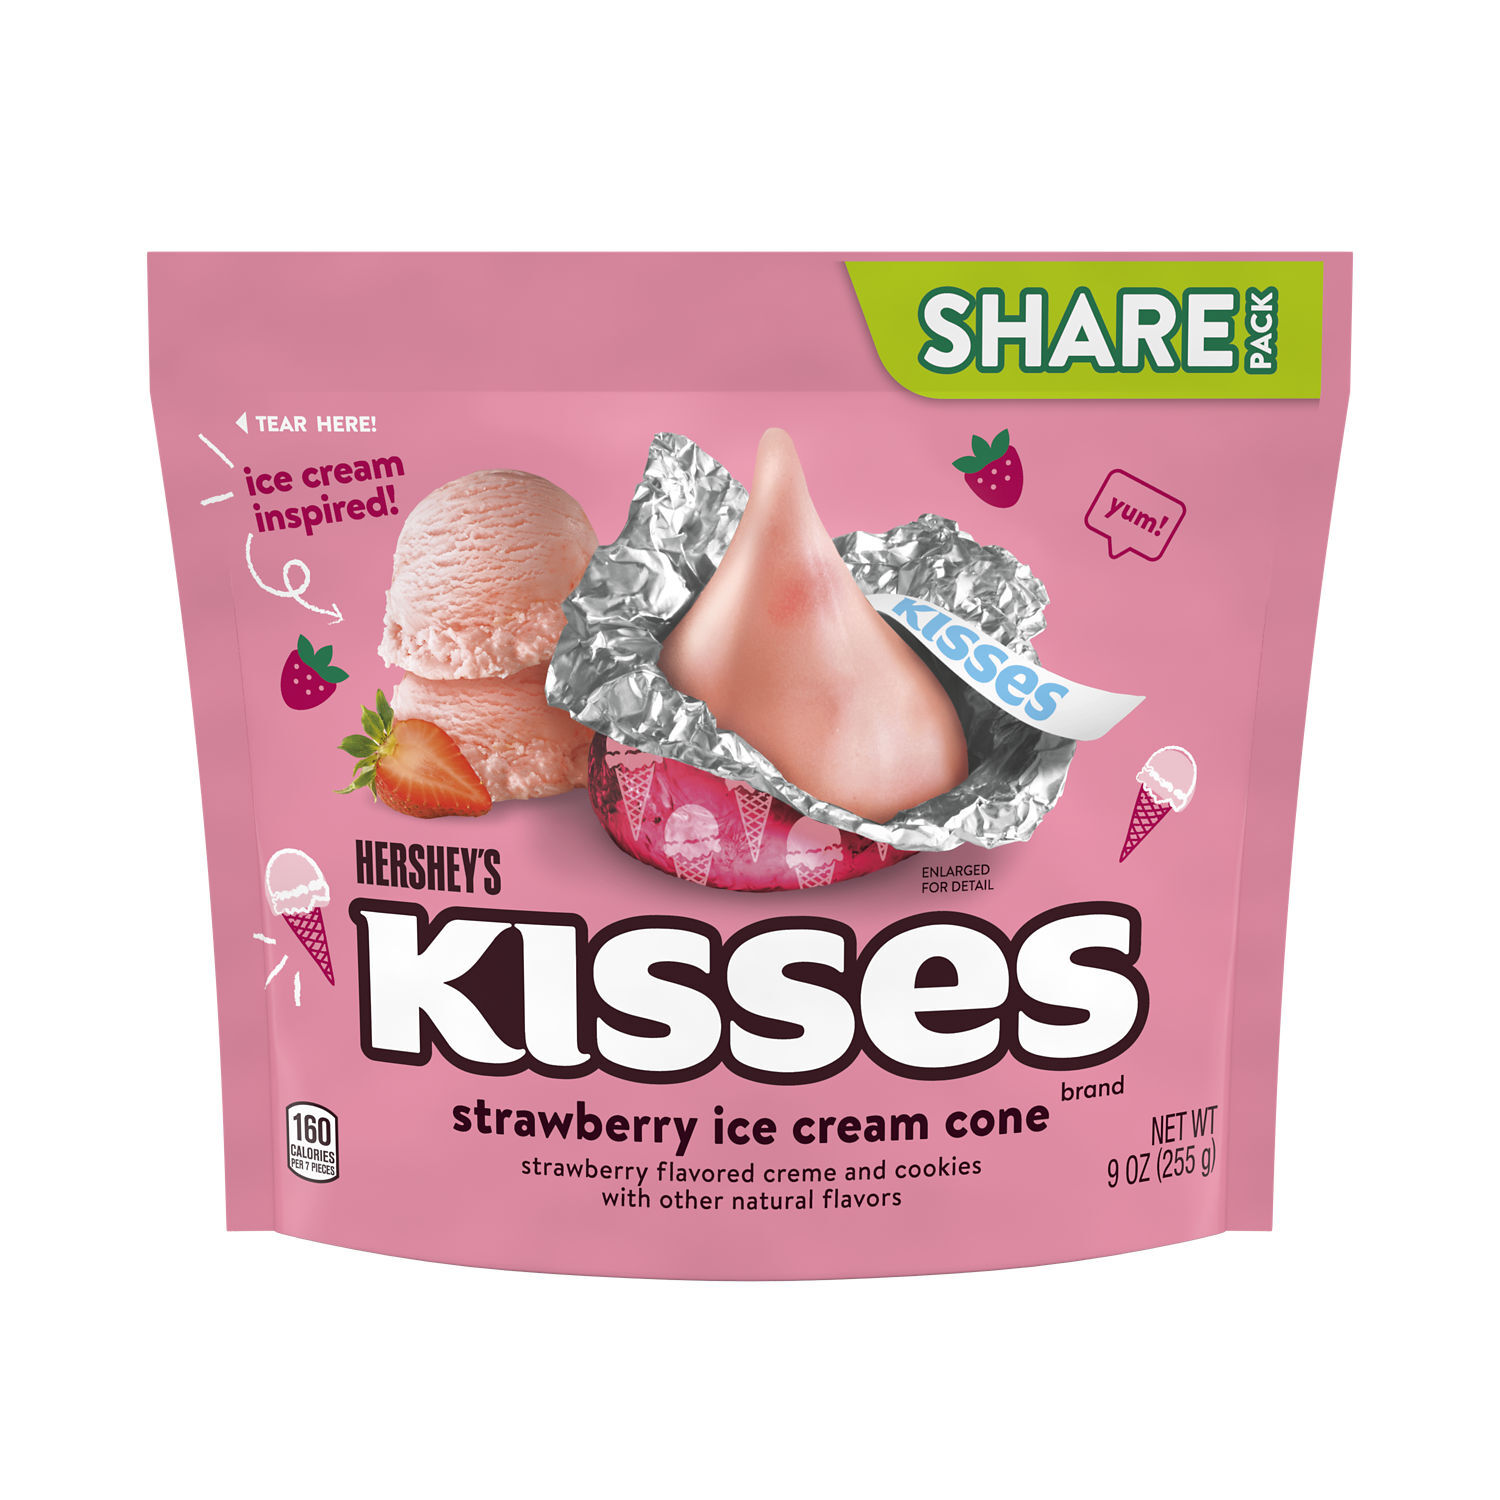 HERSHEY'S KISSES Strawberry Ice Cream Cone Flavored Candy Share Pack